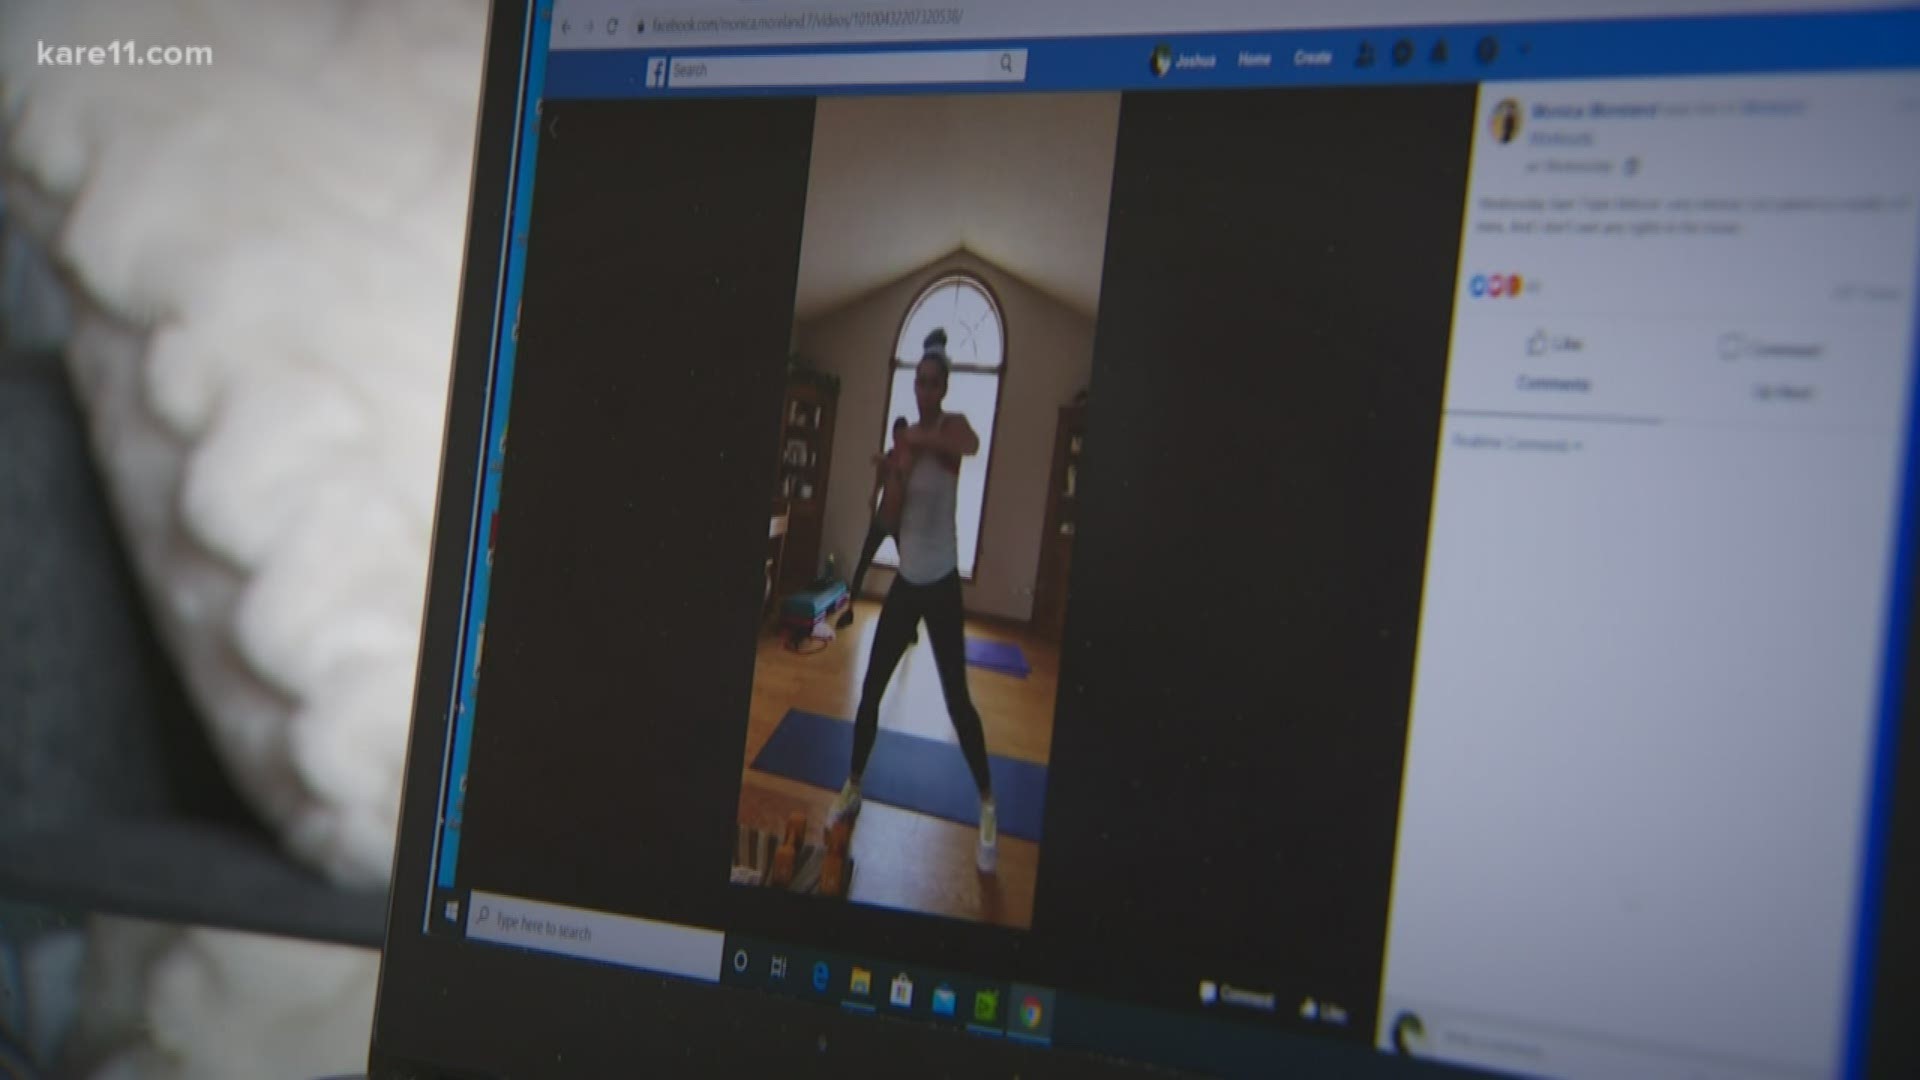 Monica Moreland, a Twin Cities trainer, started hosting live virtual workouts for people as they practice social distancing.